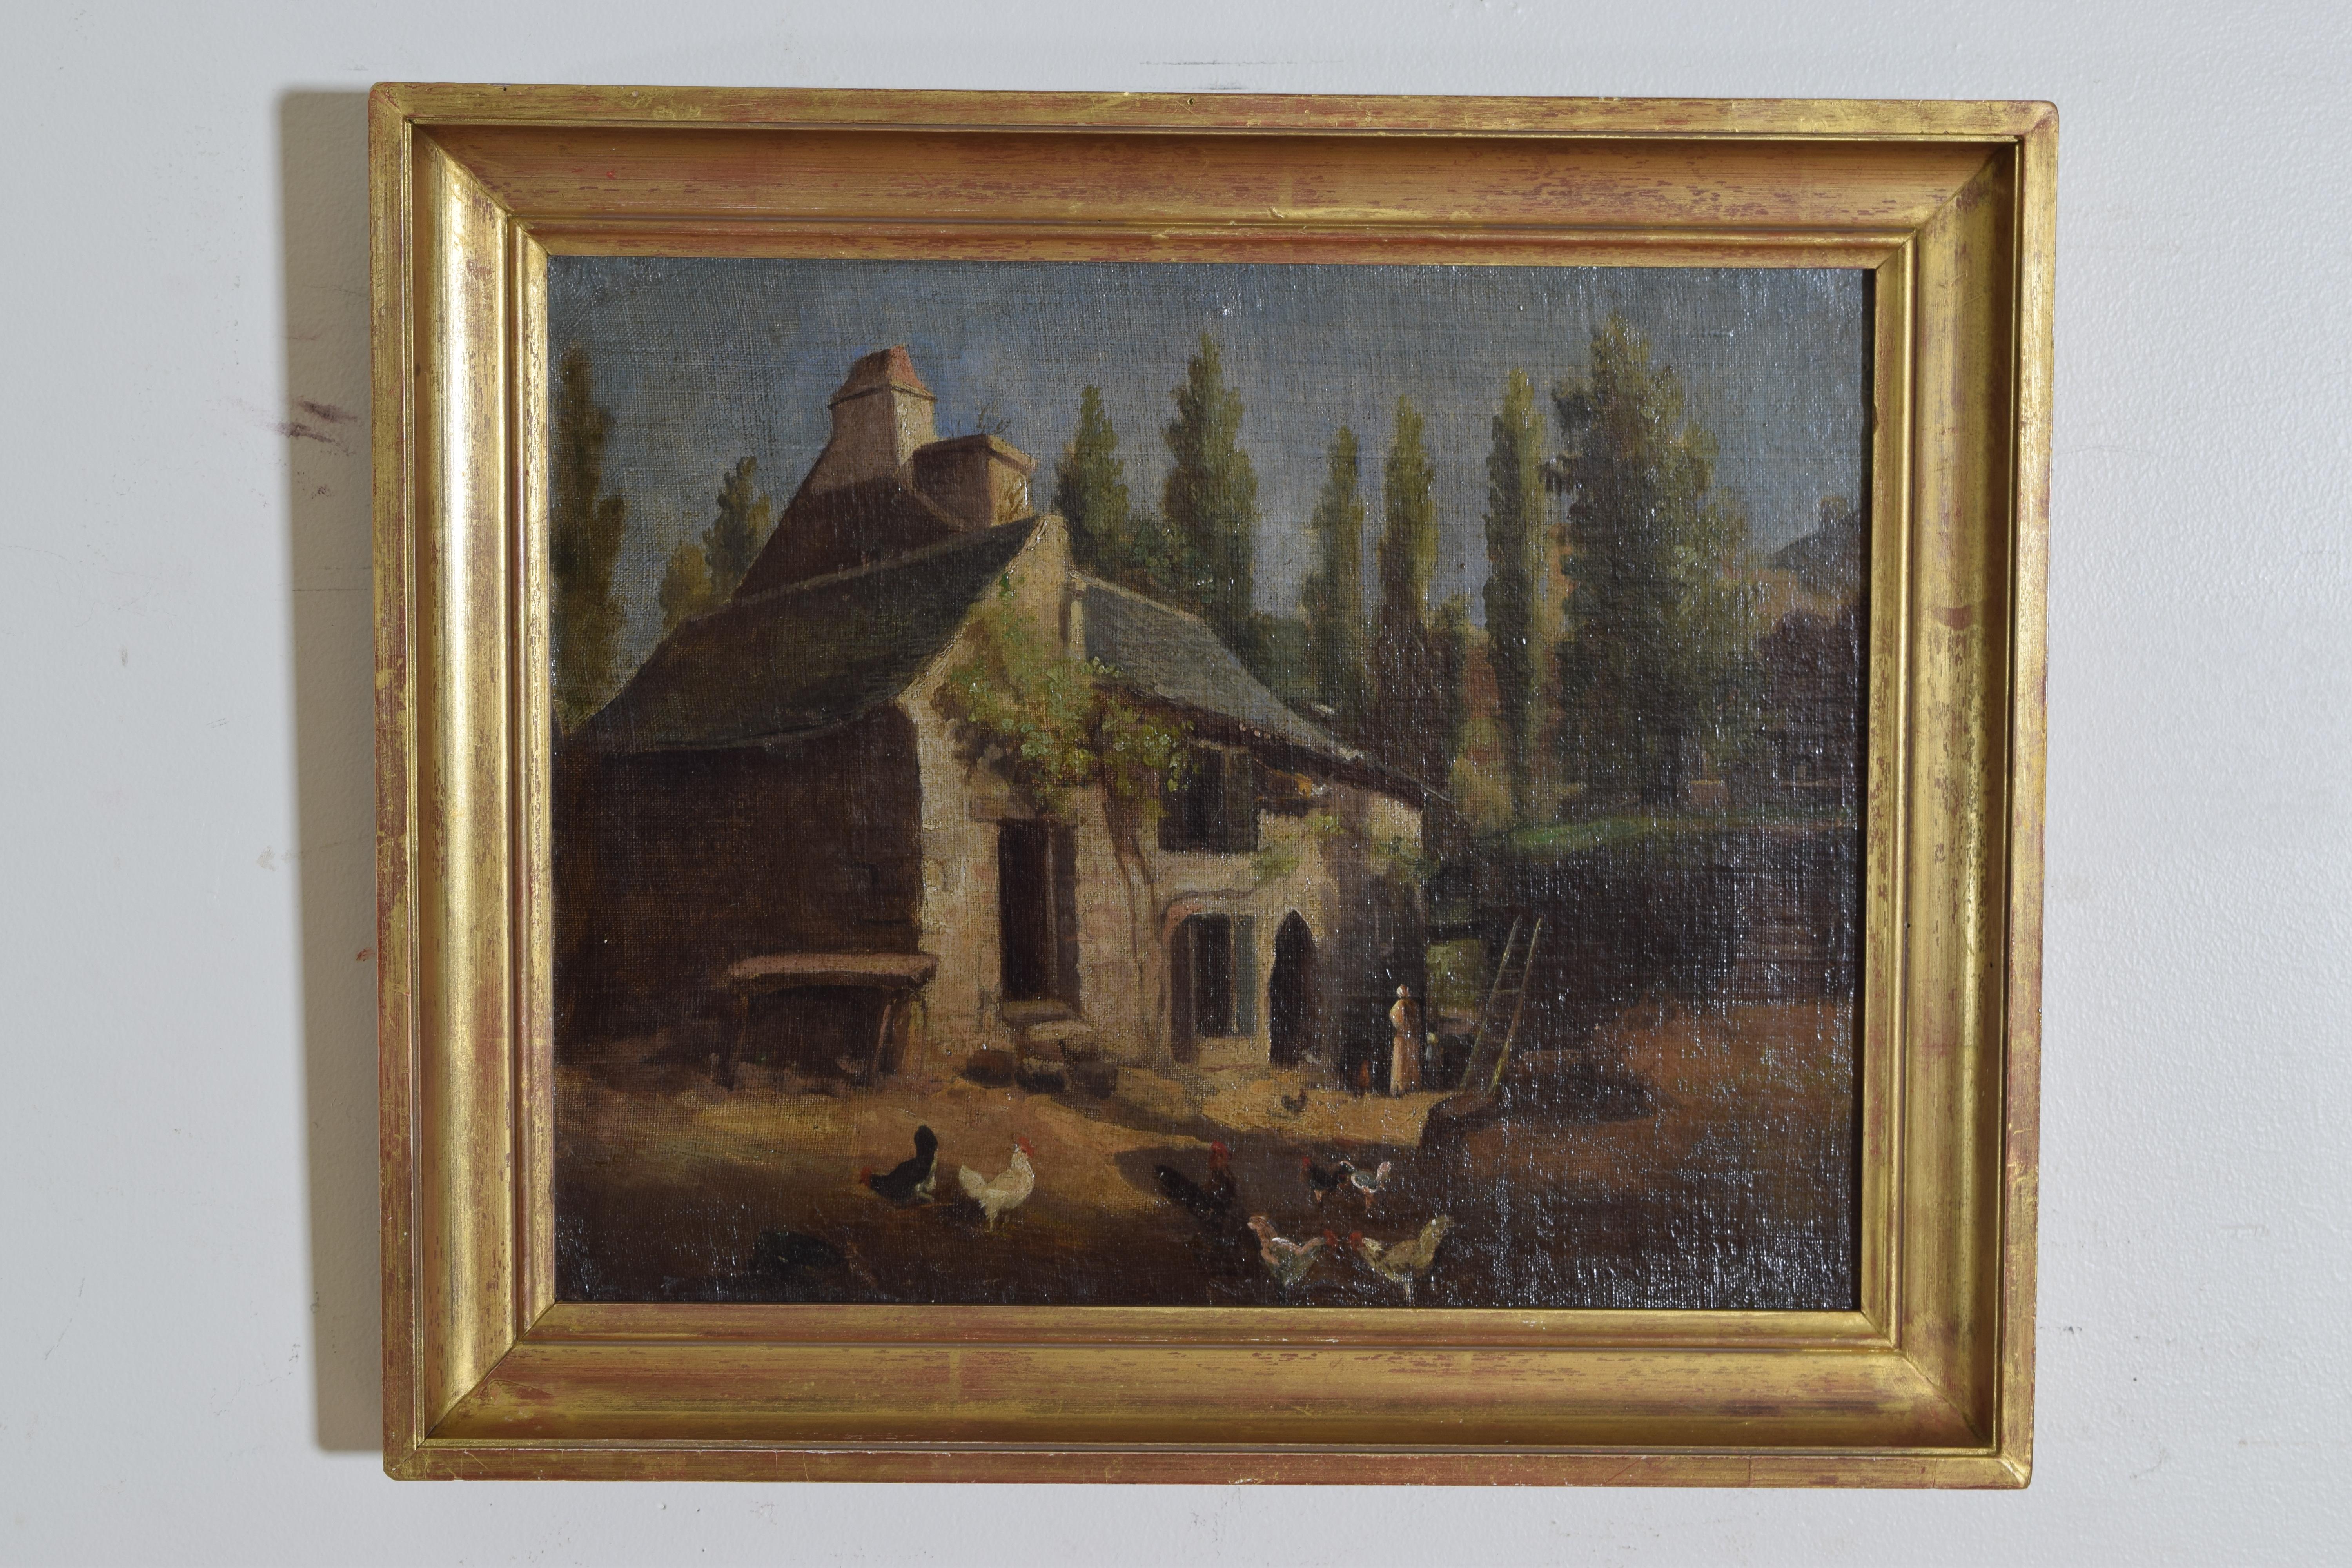 Depicting a genre scene of a French vine encased farmhouse with a mother and child, fowl in the foreground, a ladder leading to an upper yard, retaining a seemingly original giltwood concave and molded edge neoclassic frame, second quarter of the